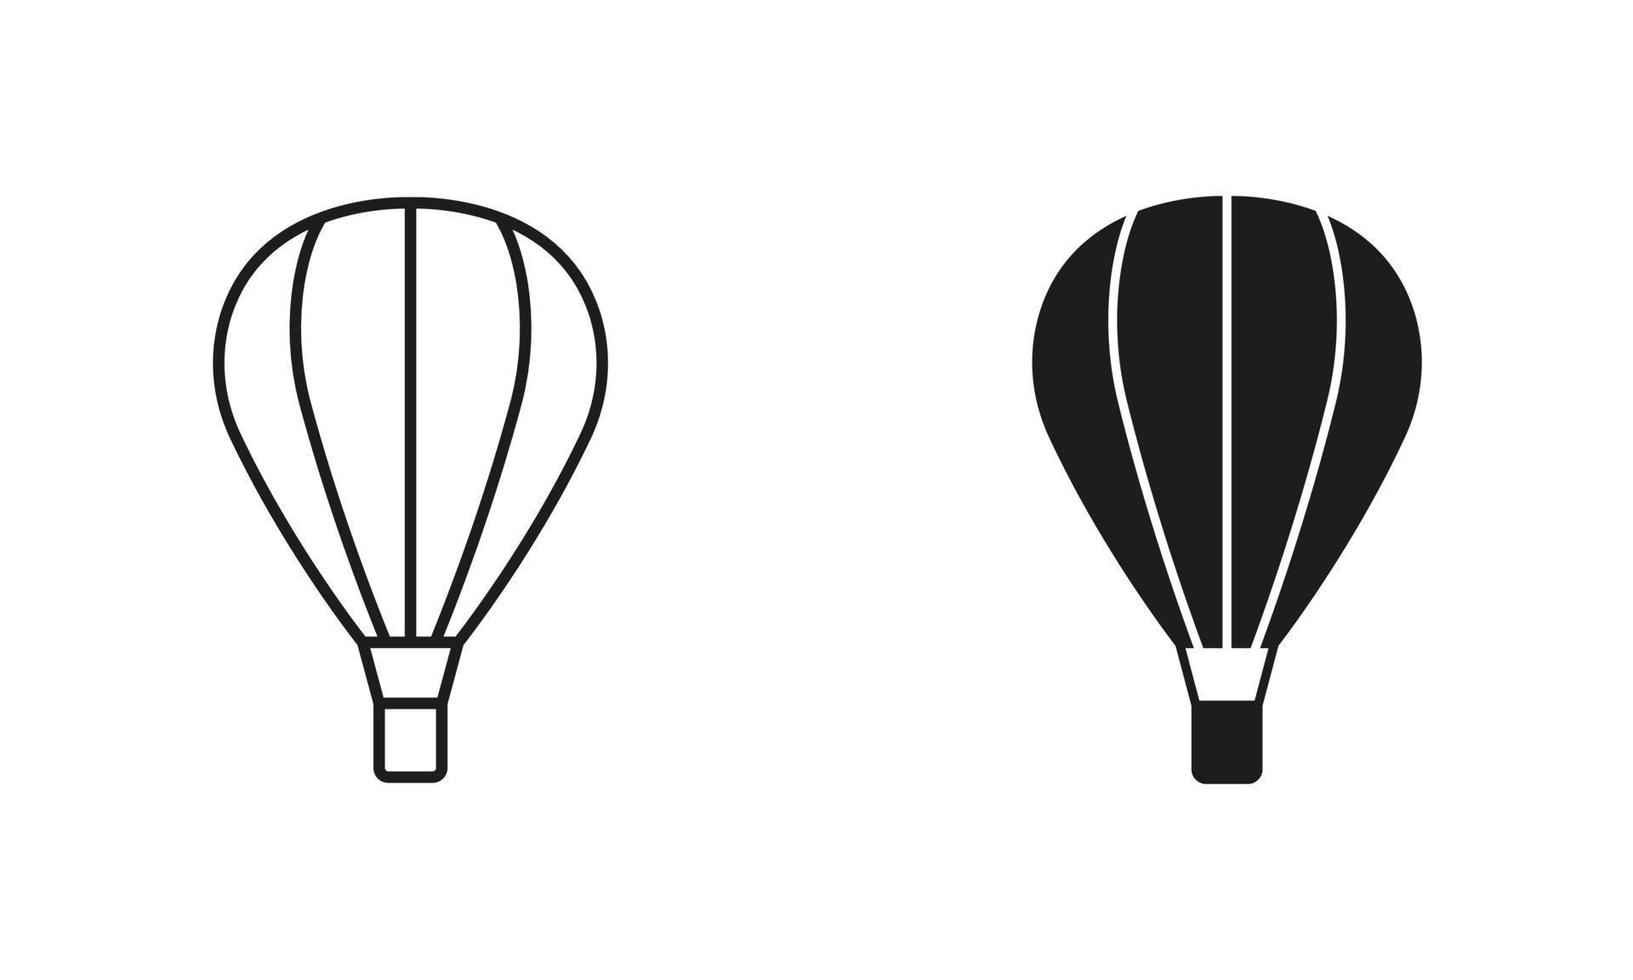 Hot Air Balloon with Basket Line and Silhouette Black Icon Set. Flight Baloon for Travel Pictogram. Fly Hotair Ballon for Sky Journey Outline and Solid Symbol Collection. Isolated Vector Illustration.